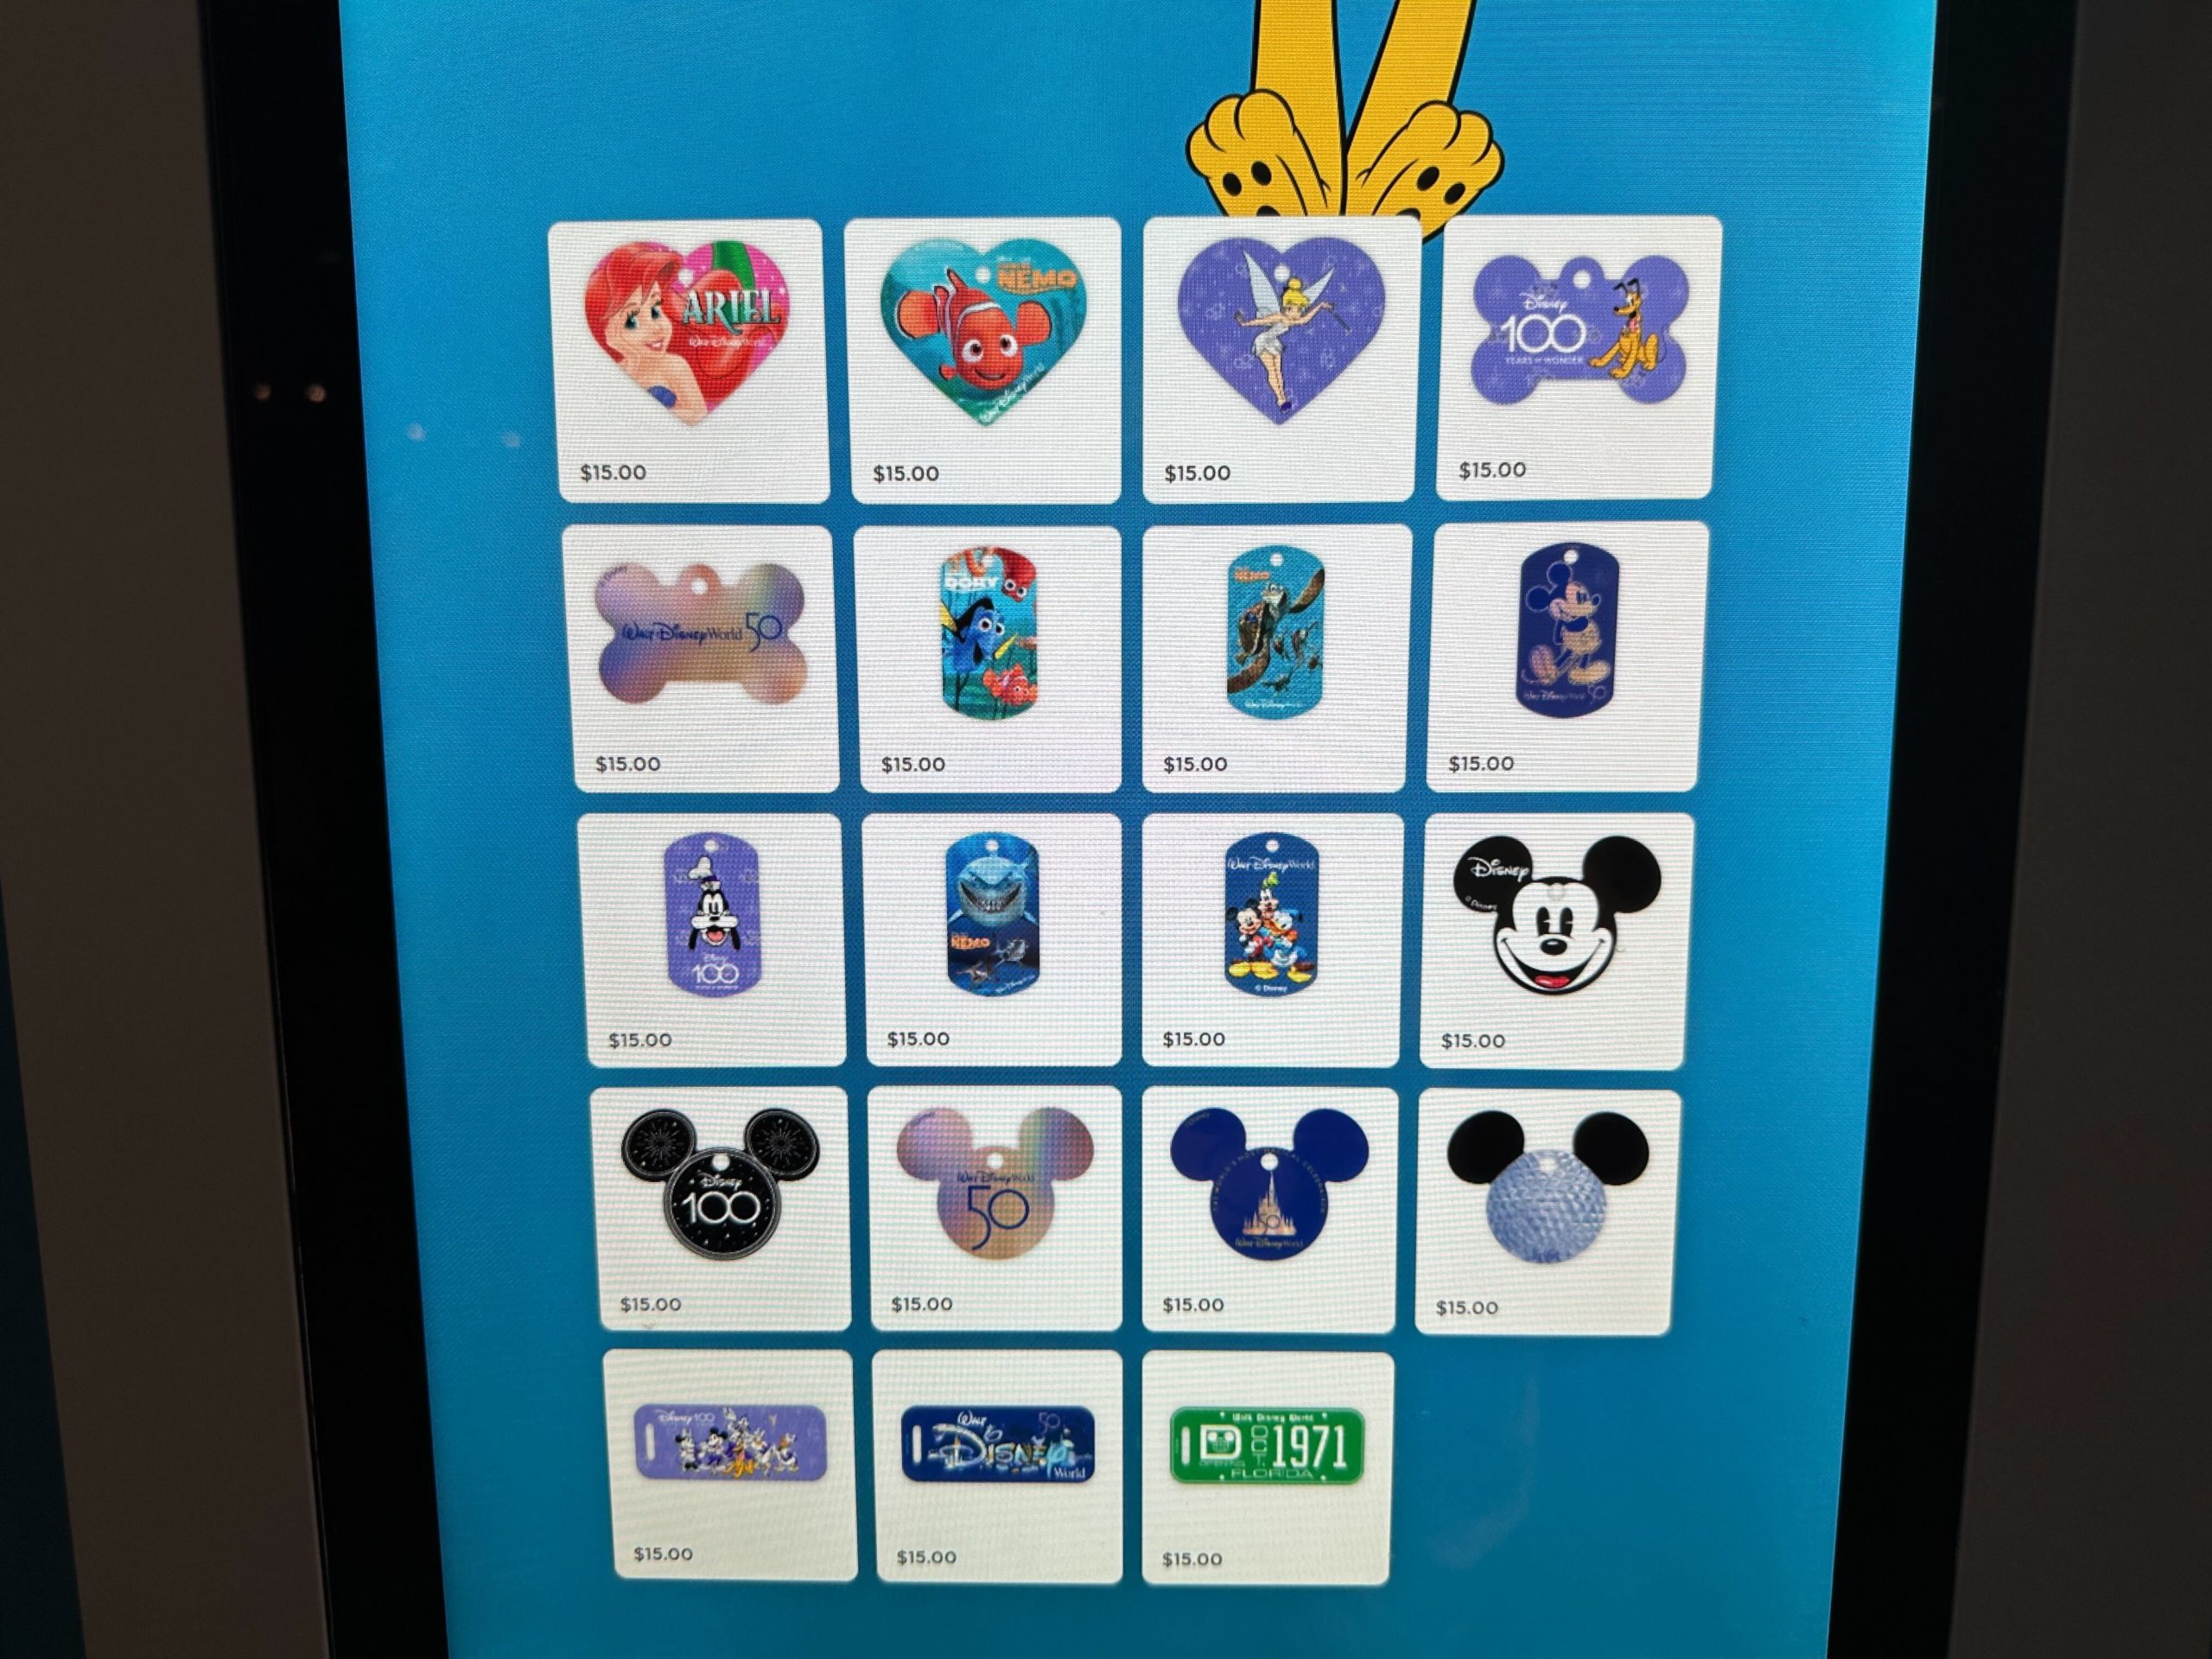 New Engravable ID Tag Machine Arrives at Disney's Contemporary Resort - WDW  News Today